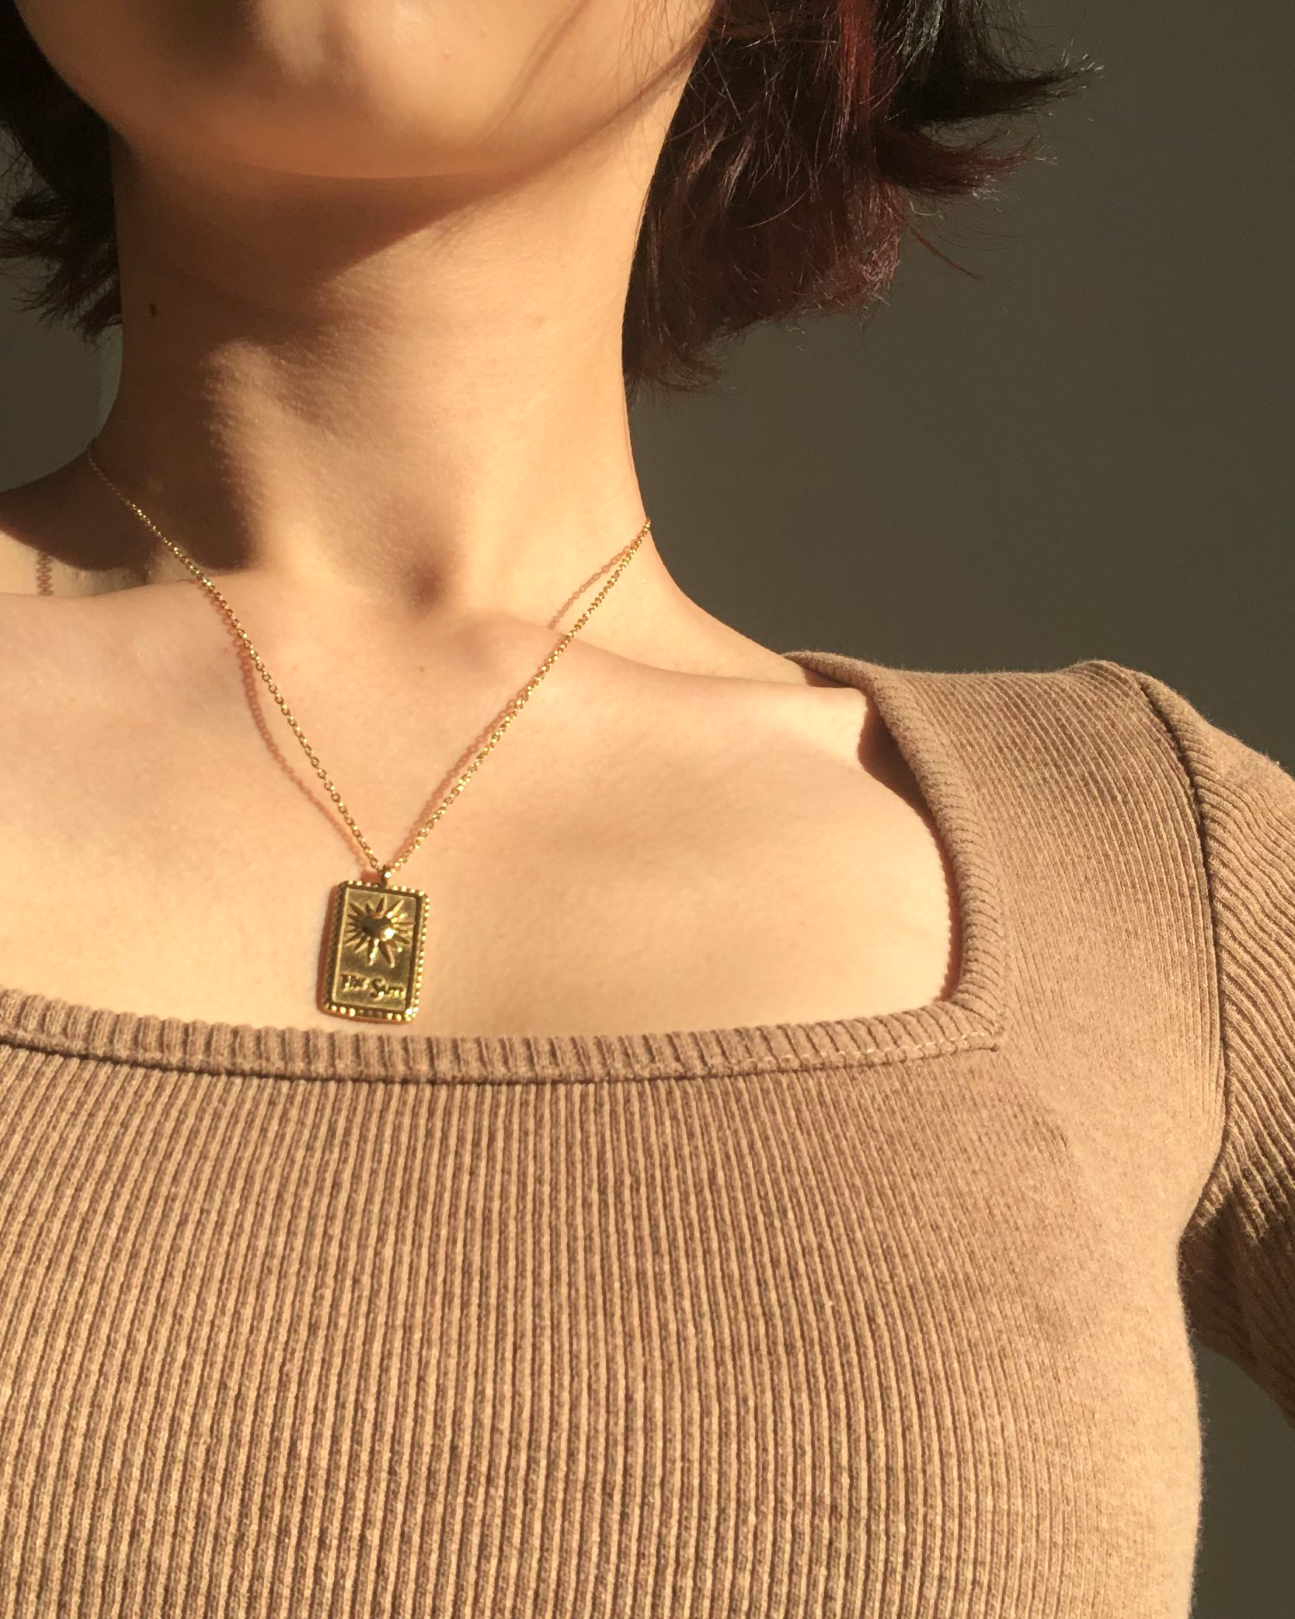 The Sun Stainless Steel Necklace